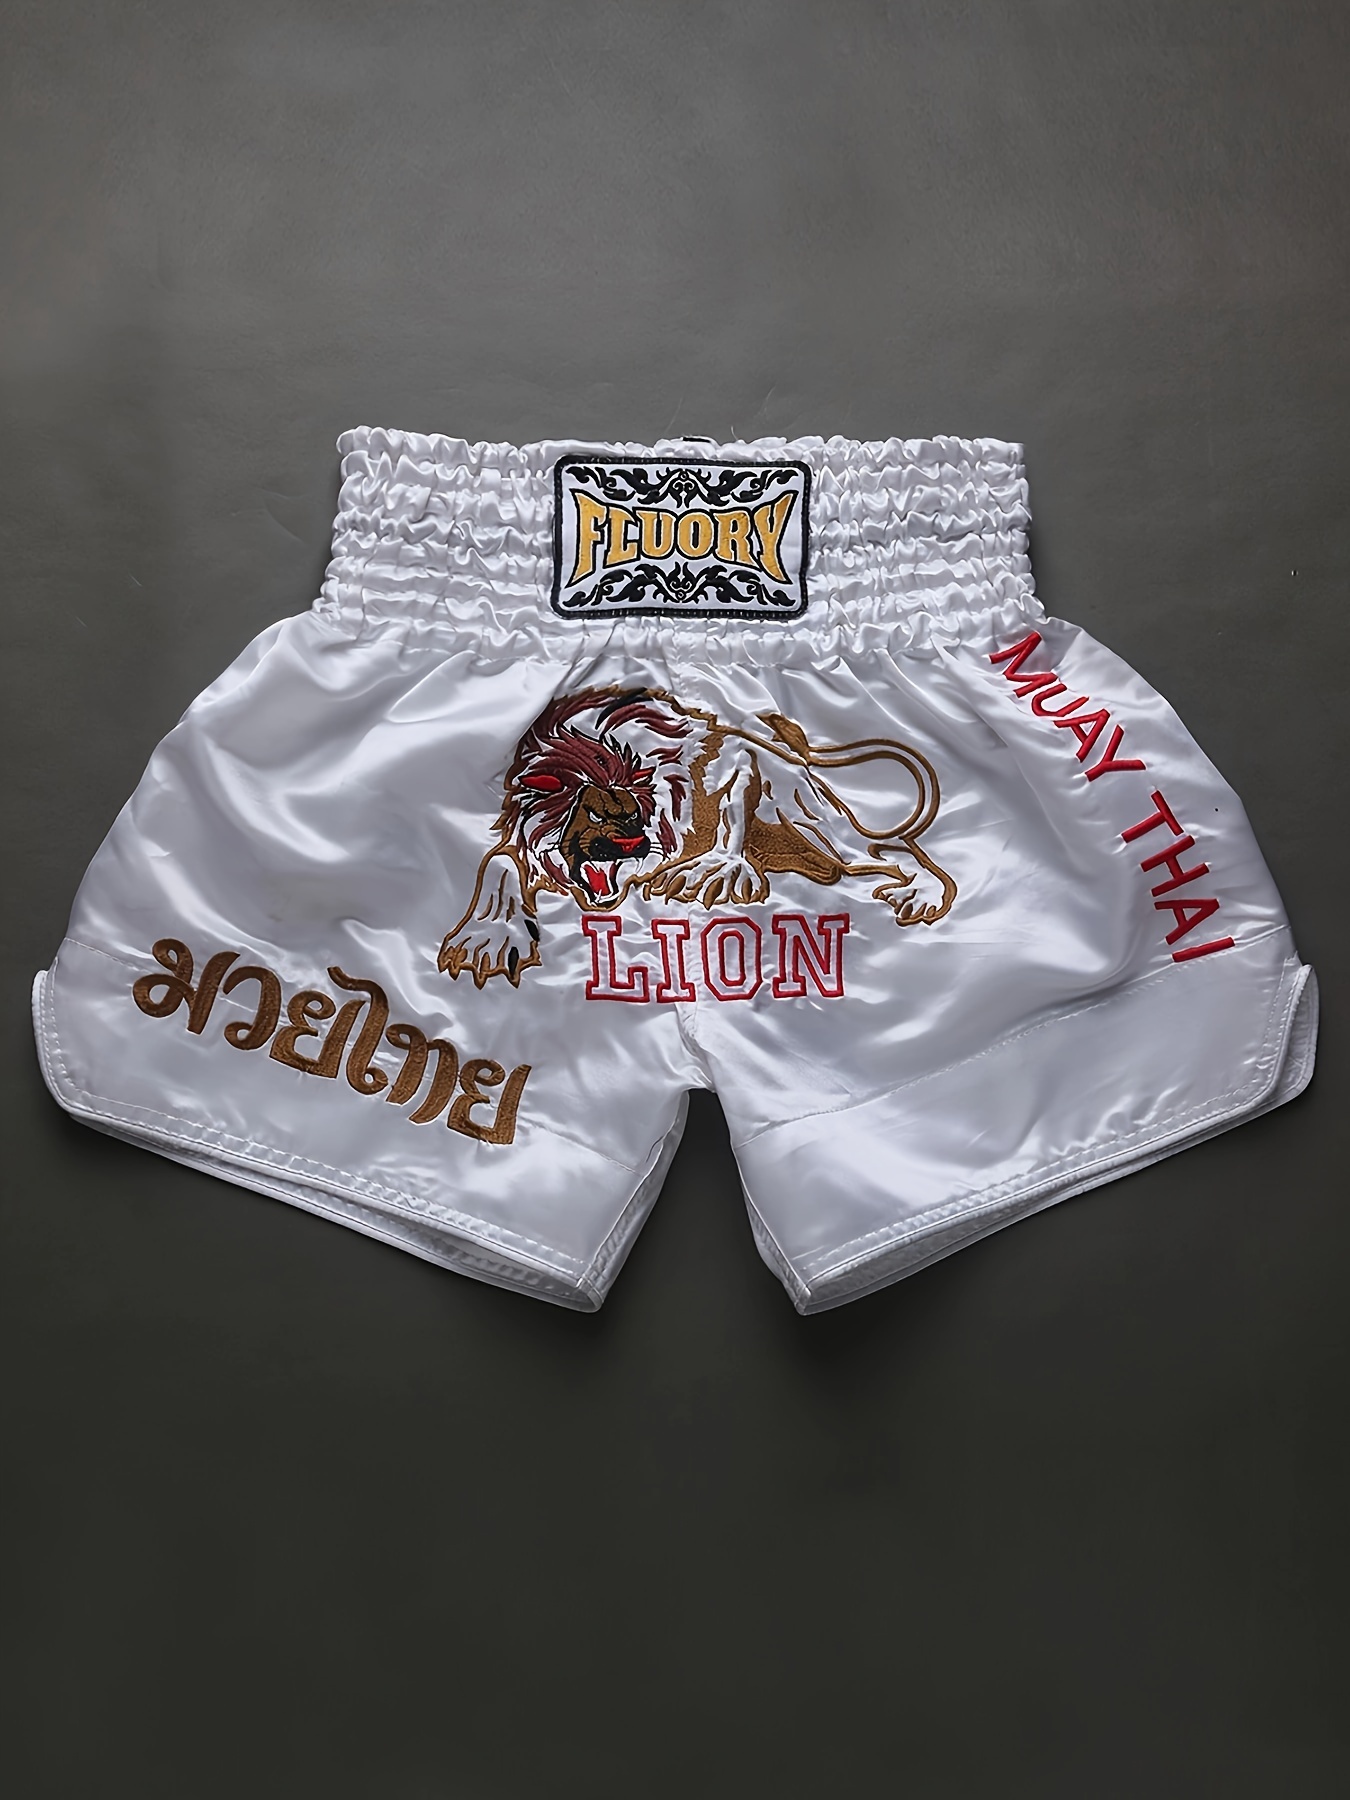 Men's Muay Thai Fight Shorts Boxing Kickboxing Shorts With Embroidery